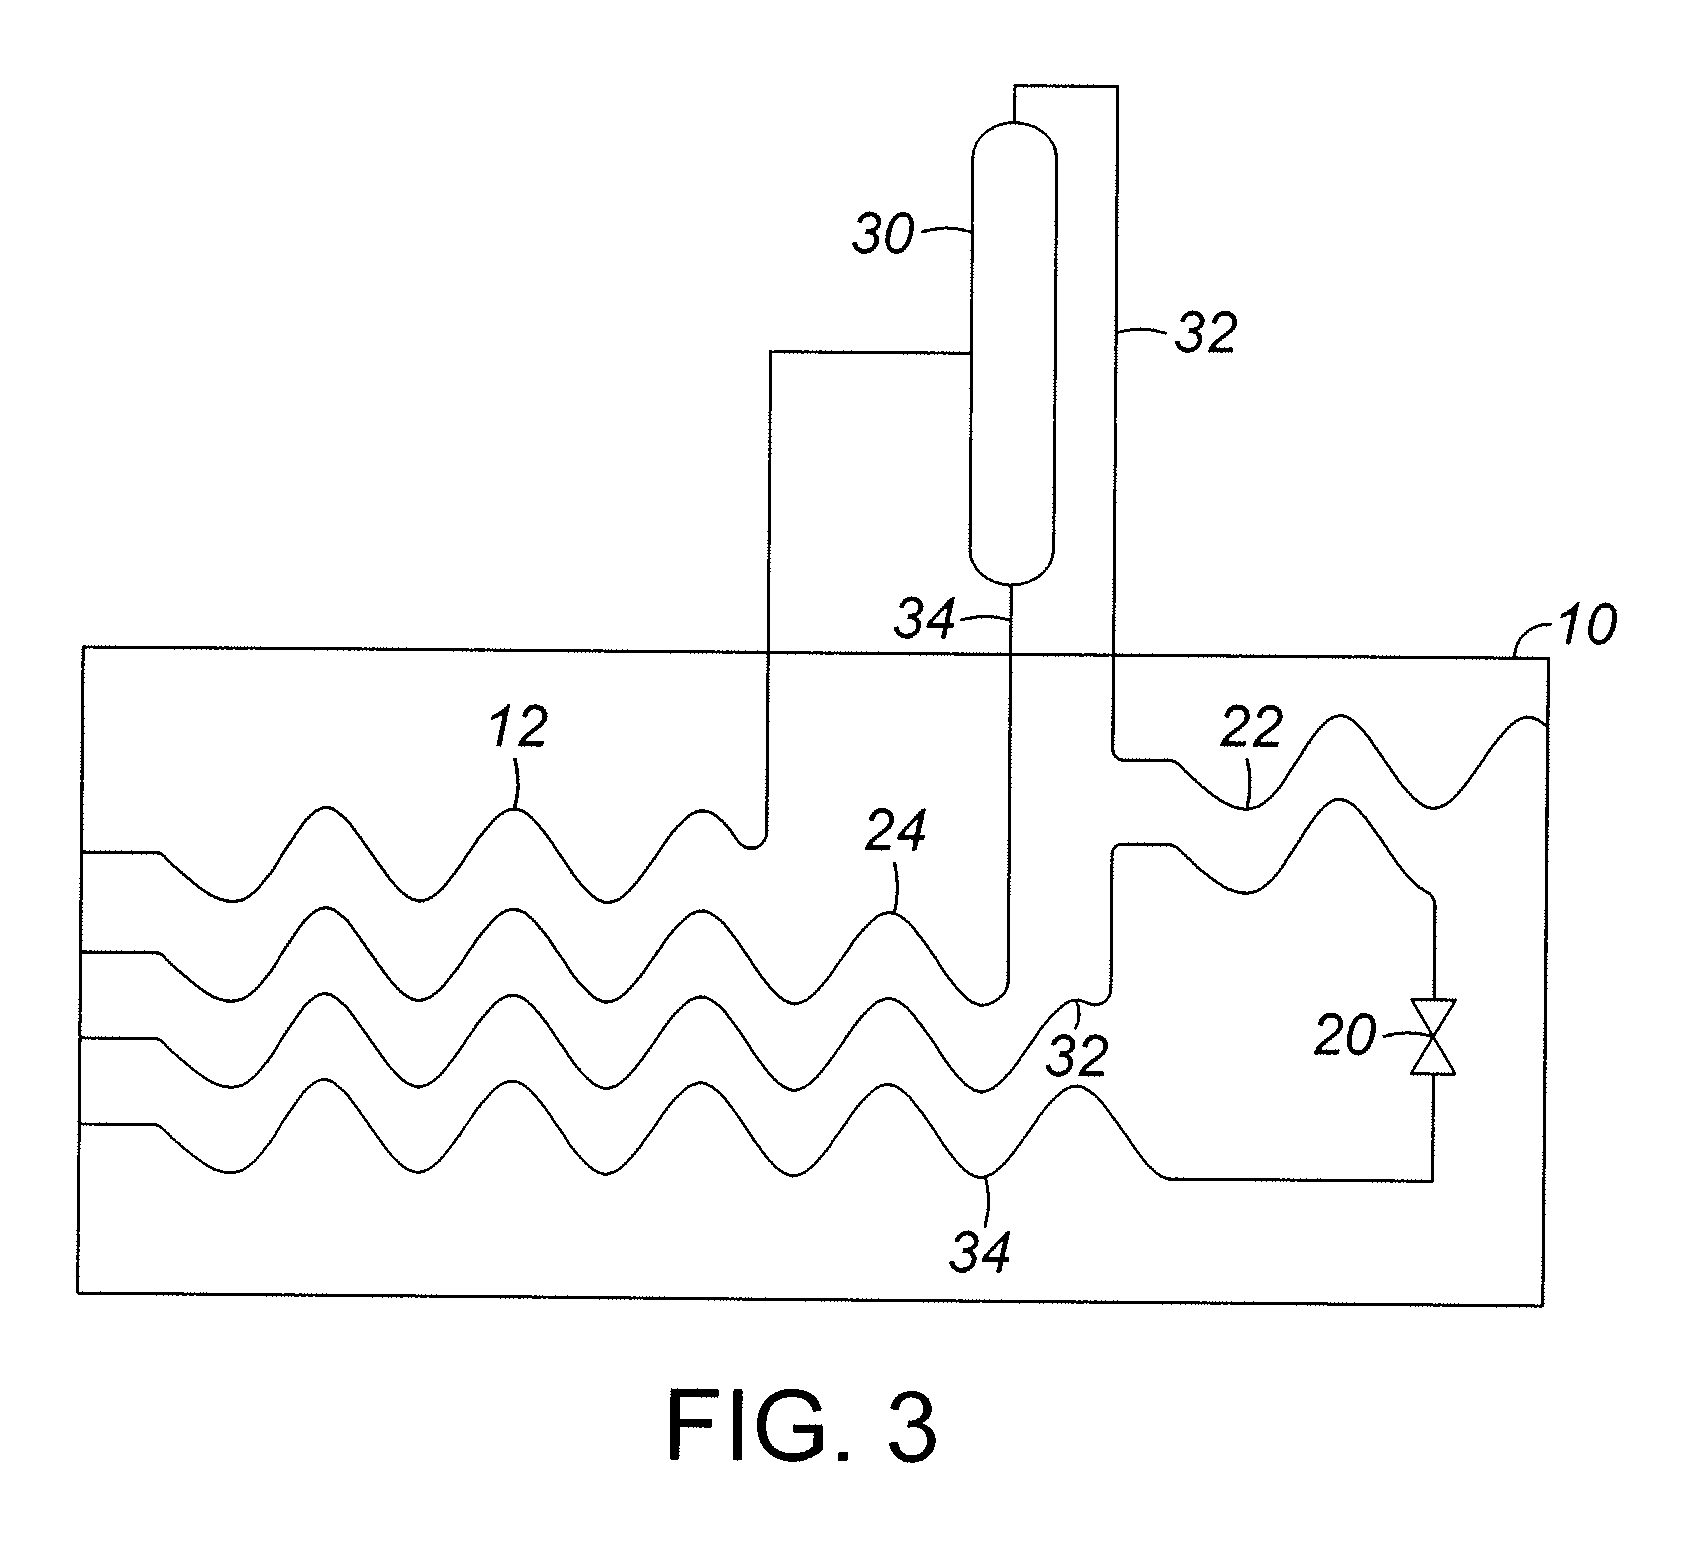 Separation of a Fluid Mixture Using Self-Cooling of the Mixture